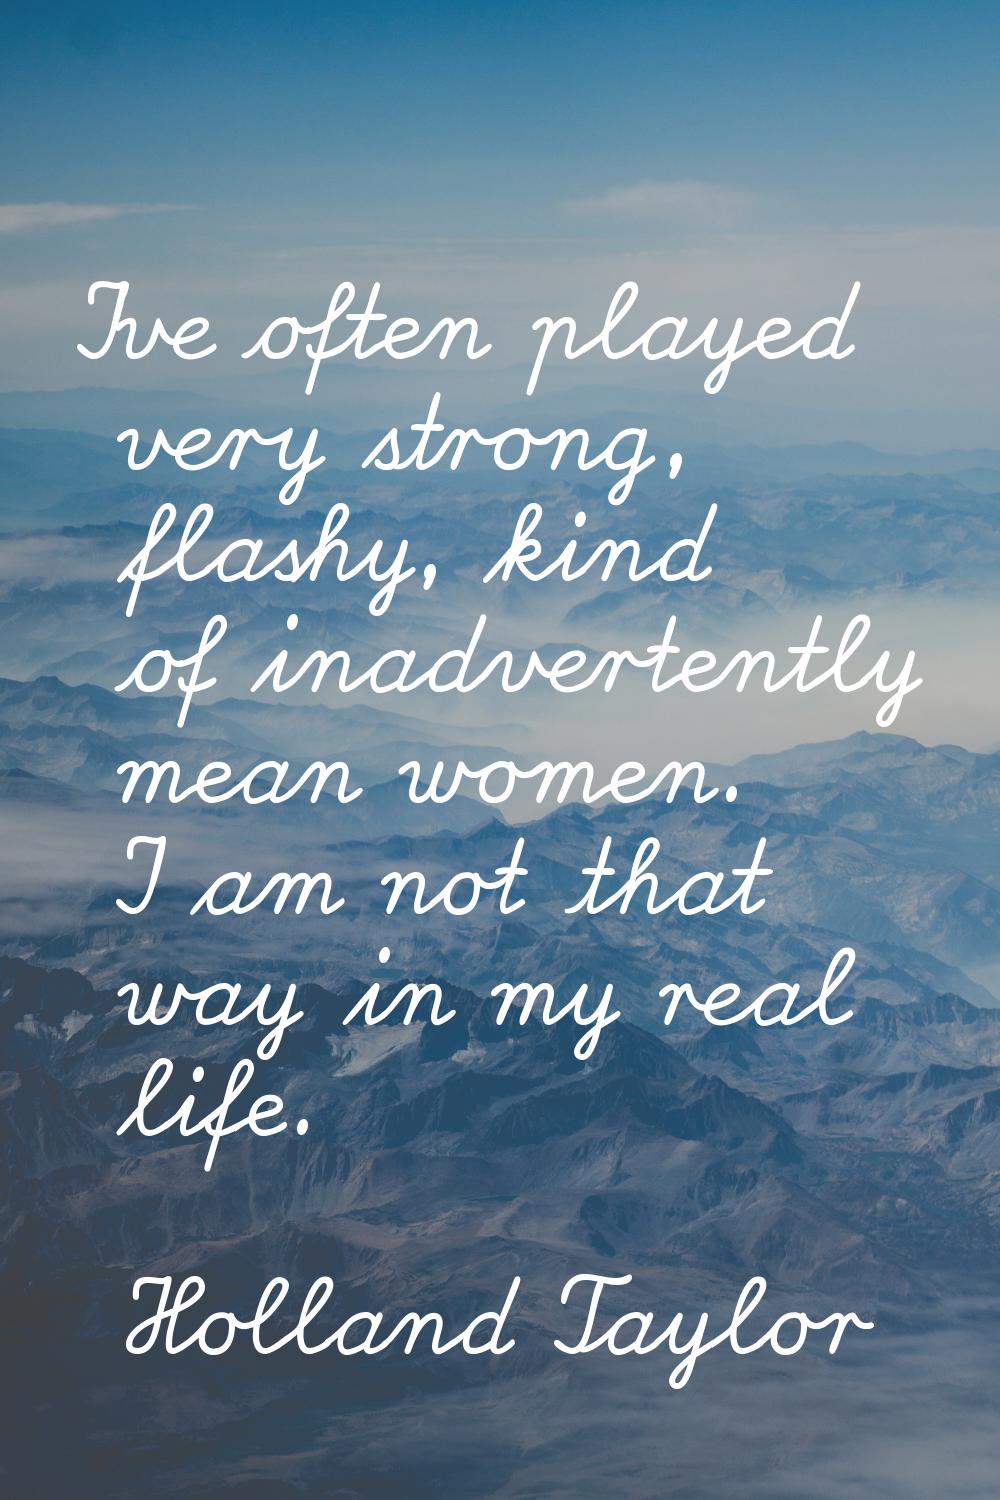 I've often played very strong, flashy, kind of inadvertently mean women. I am not that way in my re